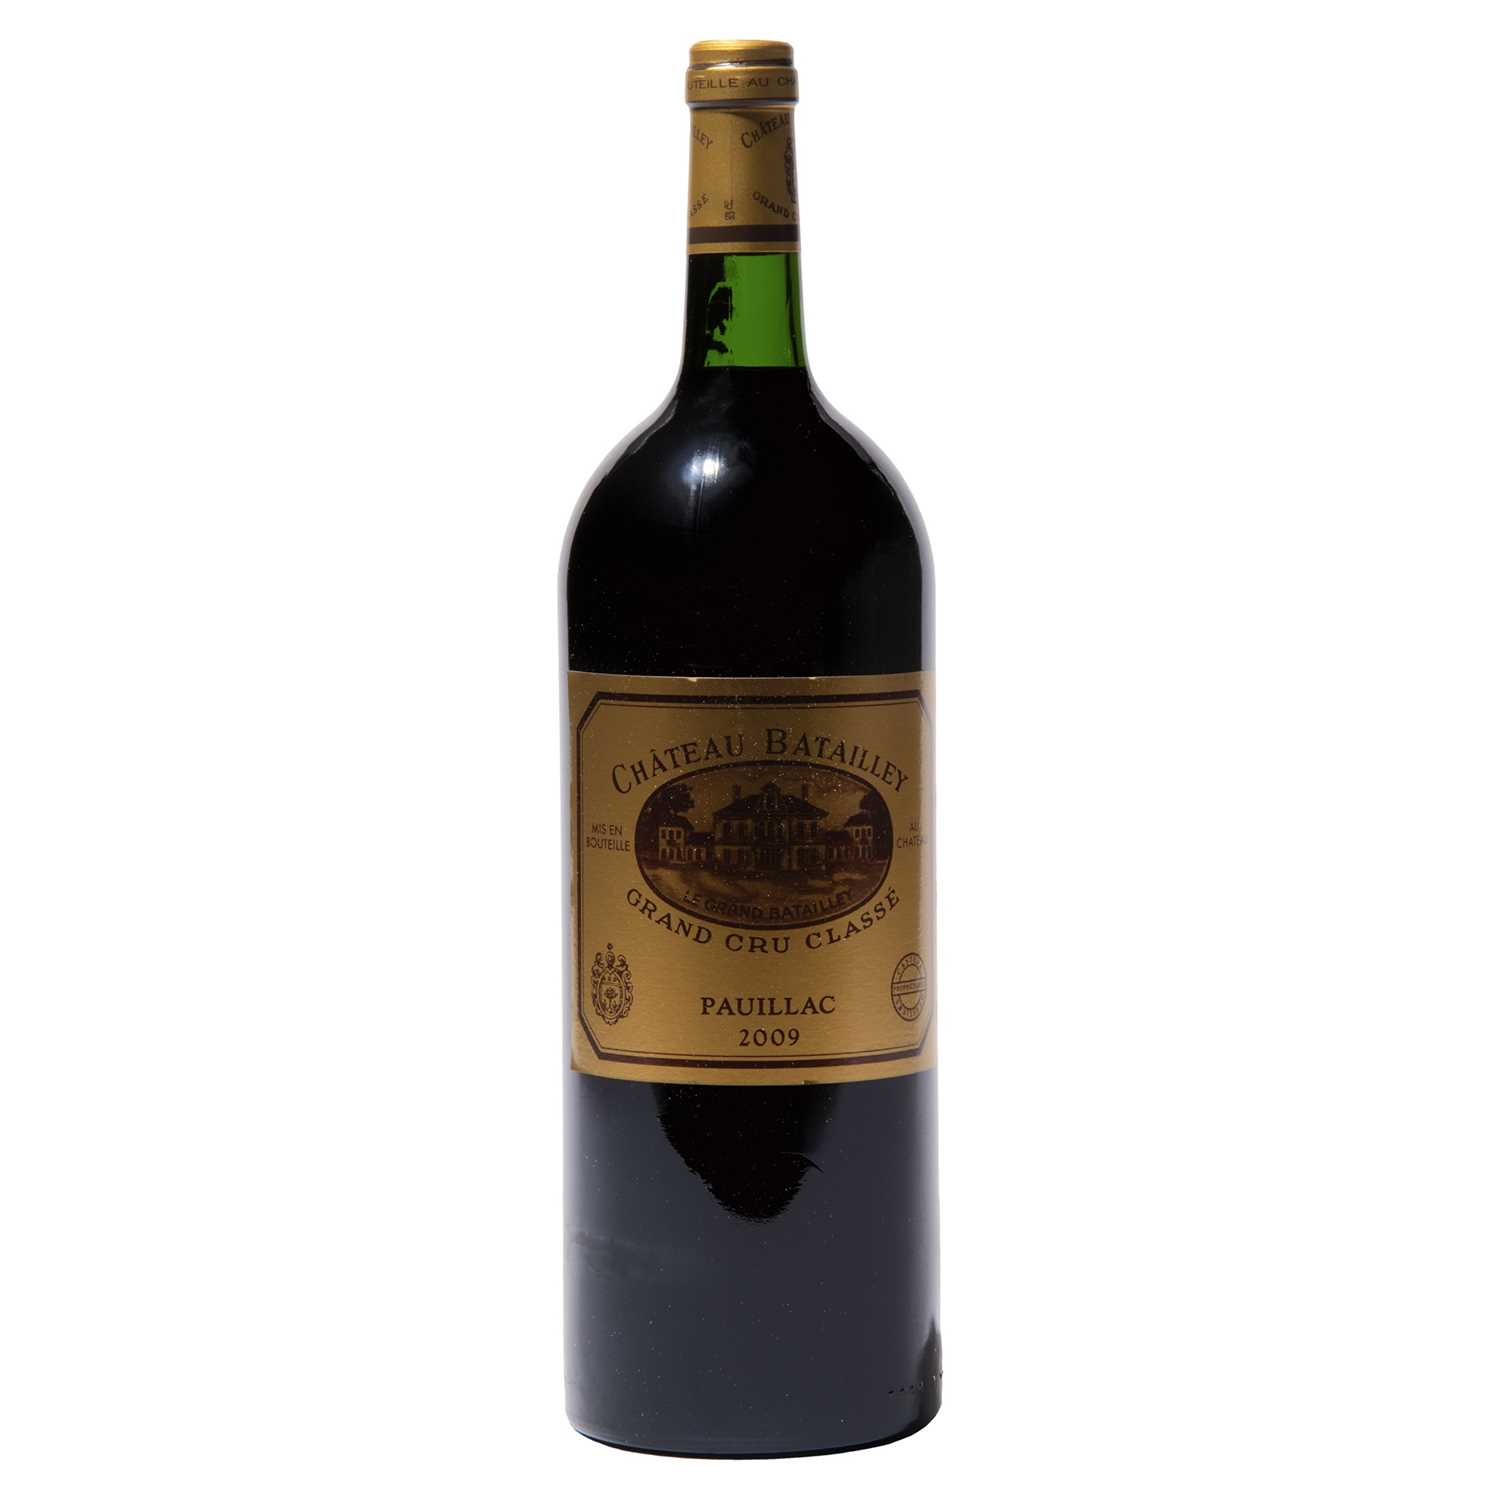 Lot 58 - 6 magnums 2009 Ch Batailley